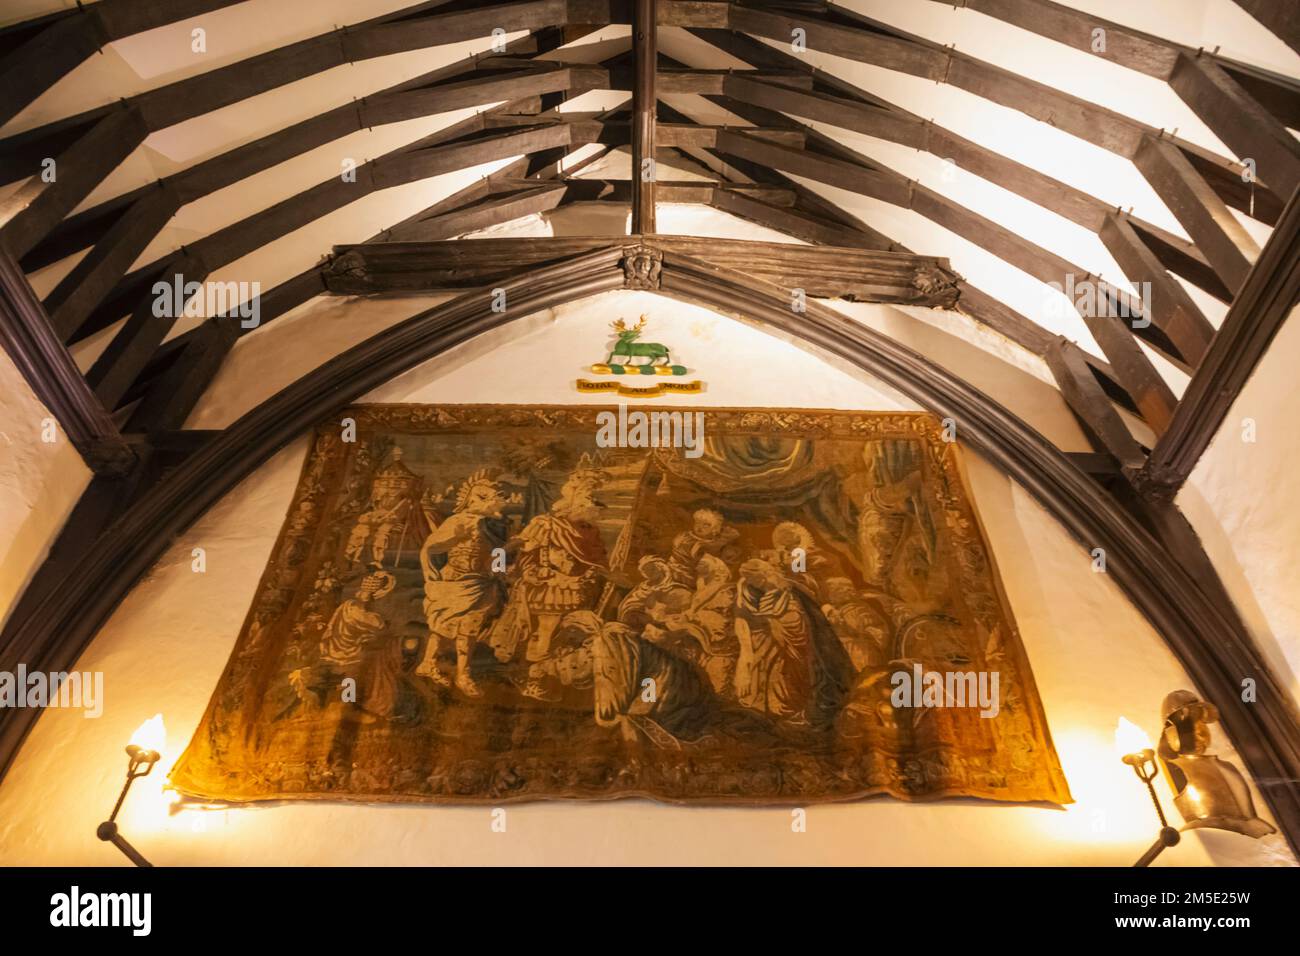 England, Kent, Sevenoaks, Ightham Mote, 14th century Moated Manor House, Interior View of The Great Hall, Ceiling Beams and Tapestry Stock Photo